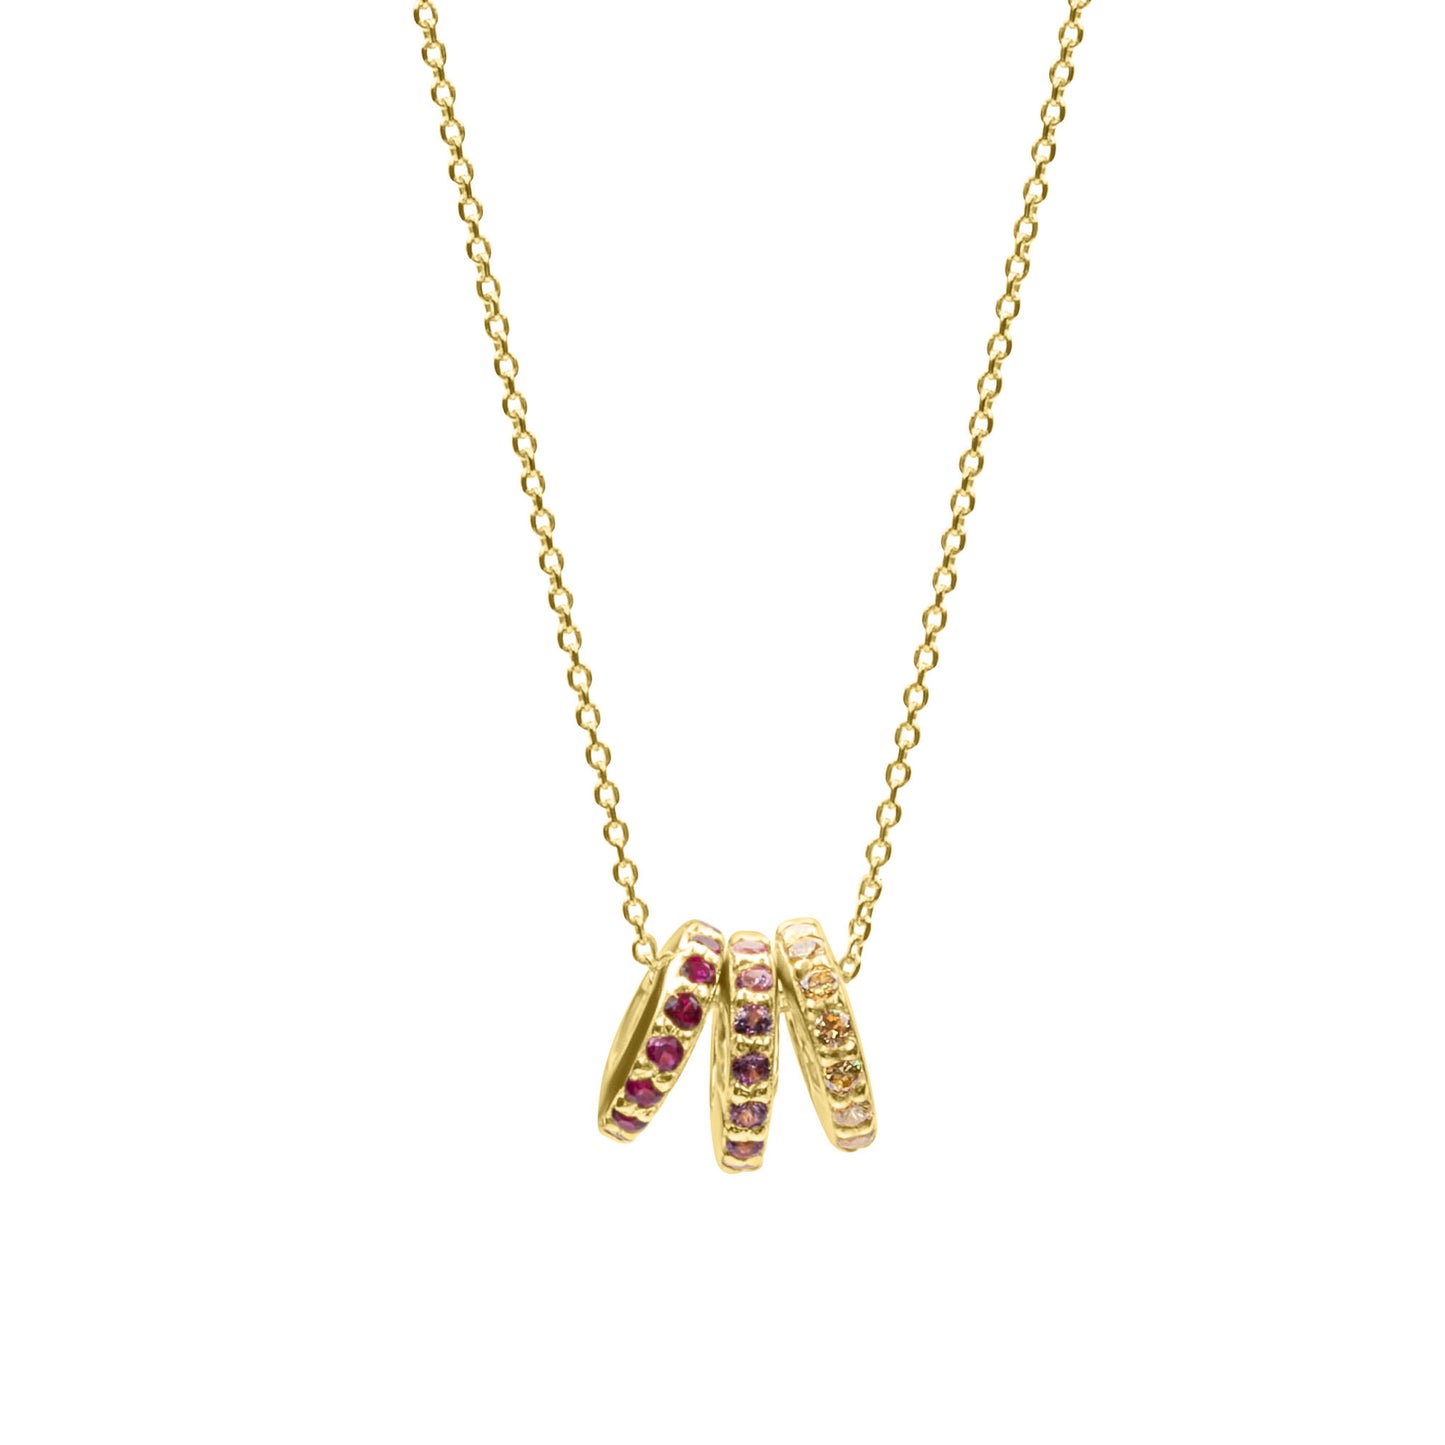 Candy Crush Necklace - Gold Plated